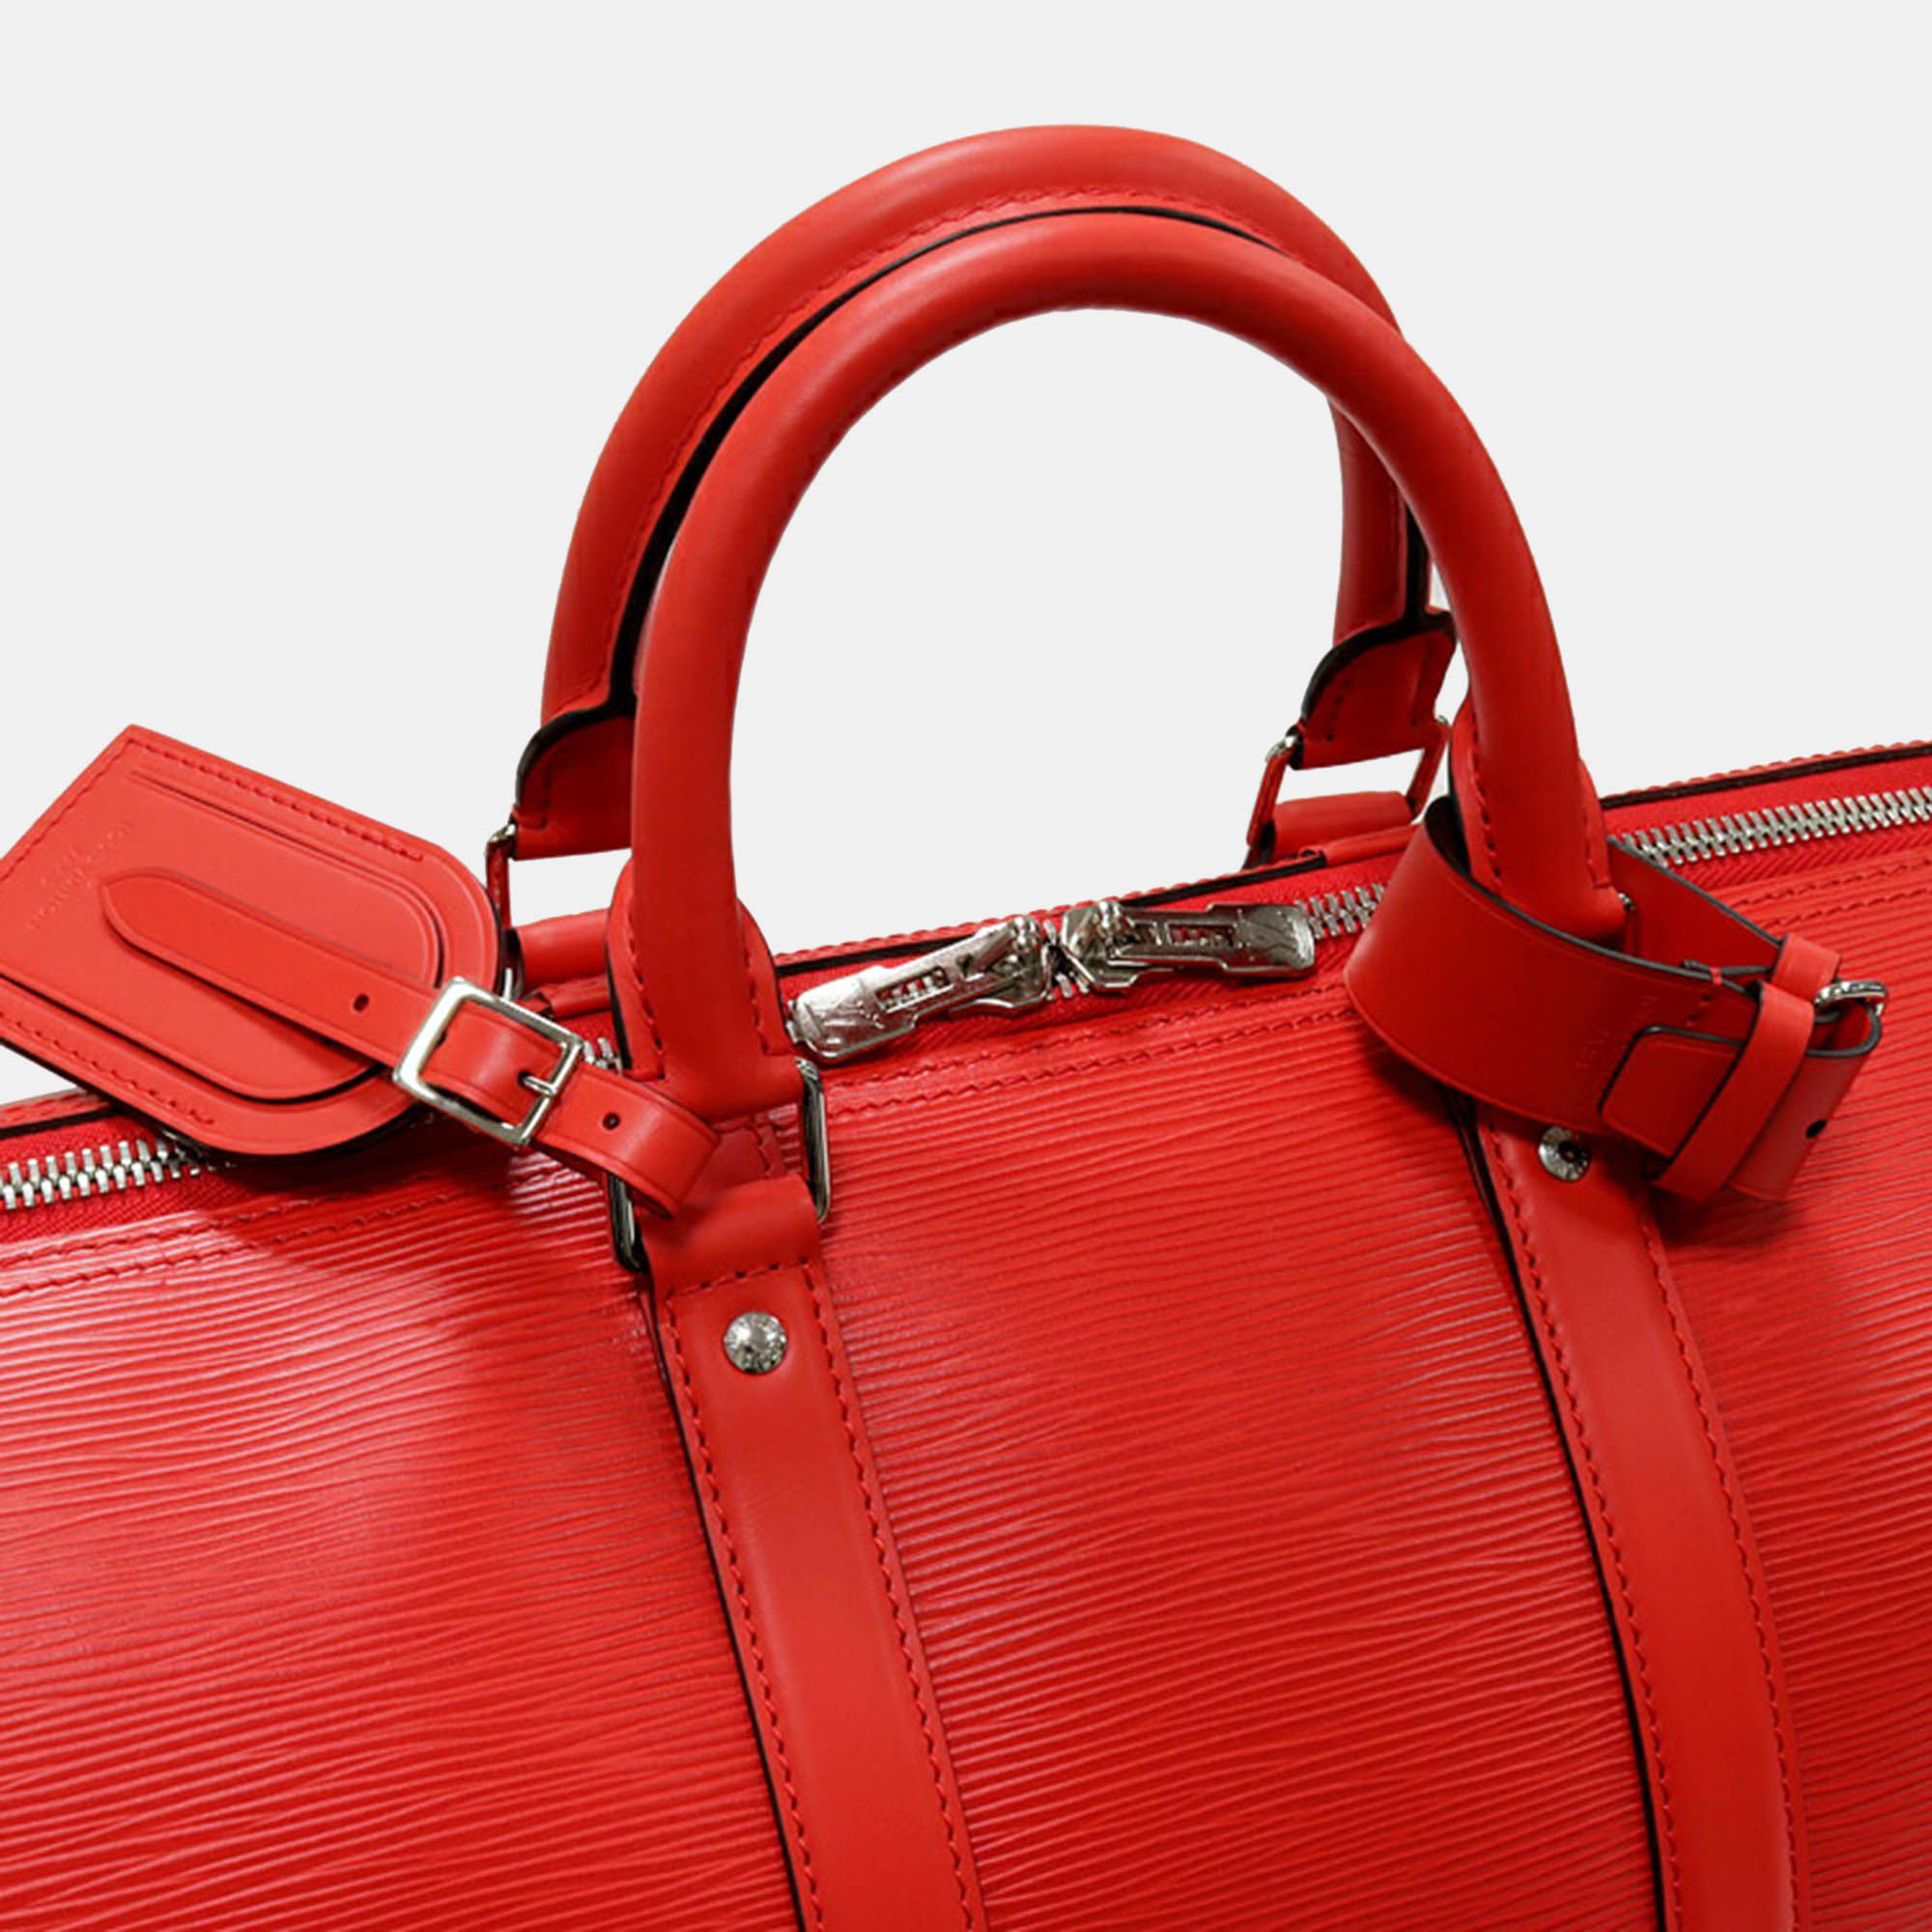 LOUIS VUITTON X Supreme Red Epi Leather Keepall 45cm Bandouliere